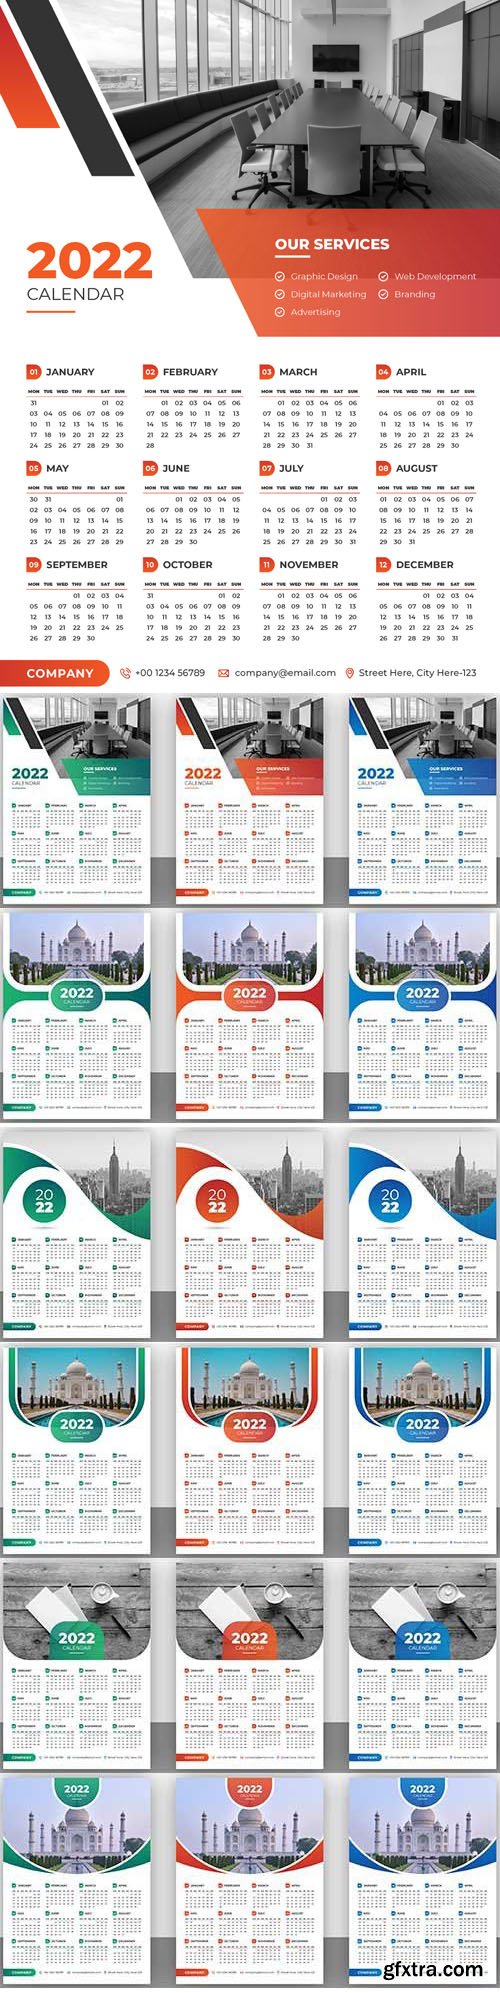 Realistic 2022 Calendars - 6 Vector Templates In 3 Colors Each